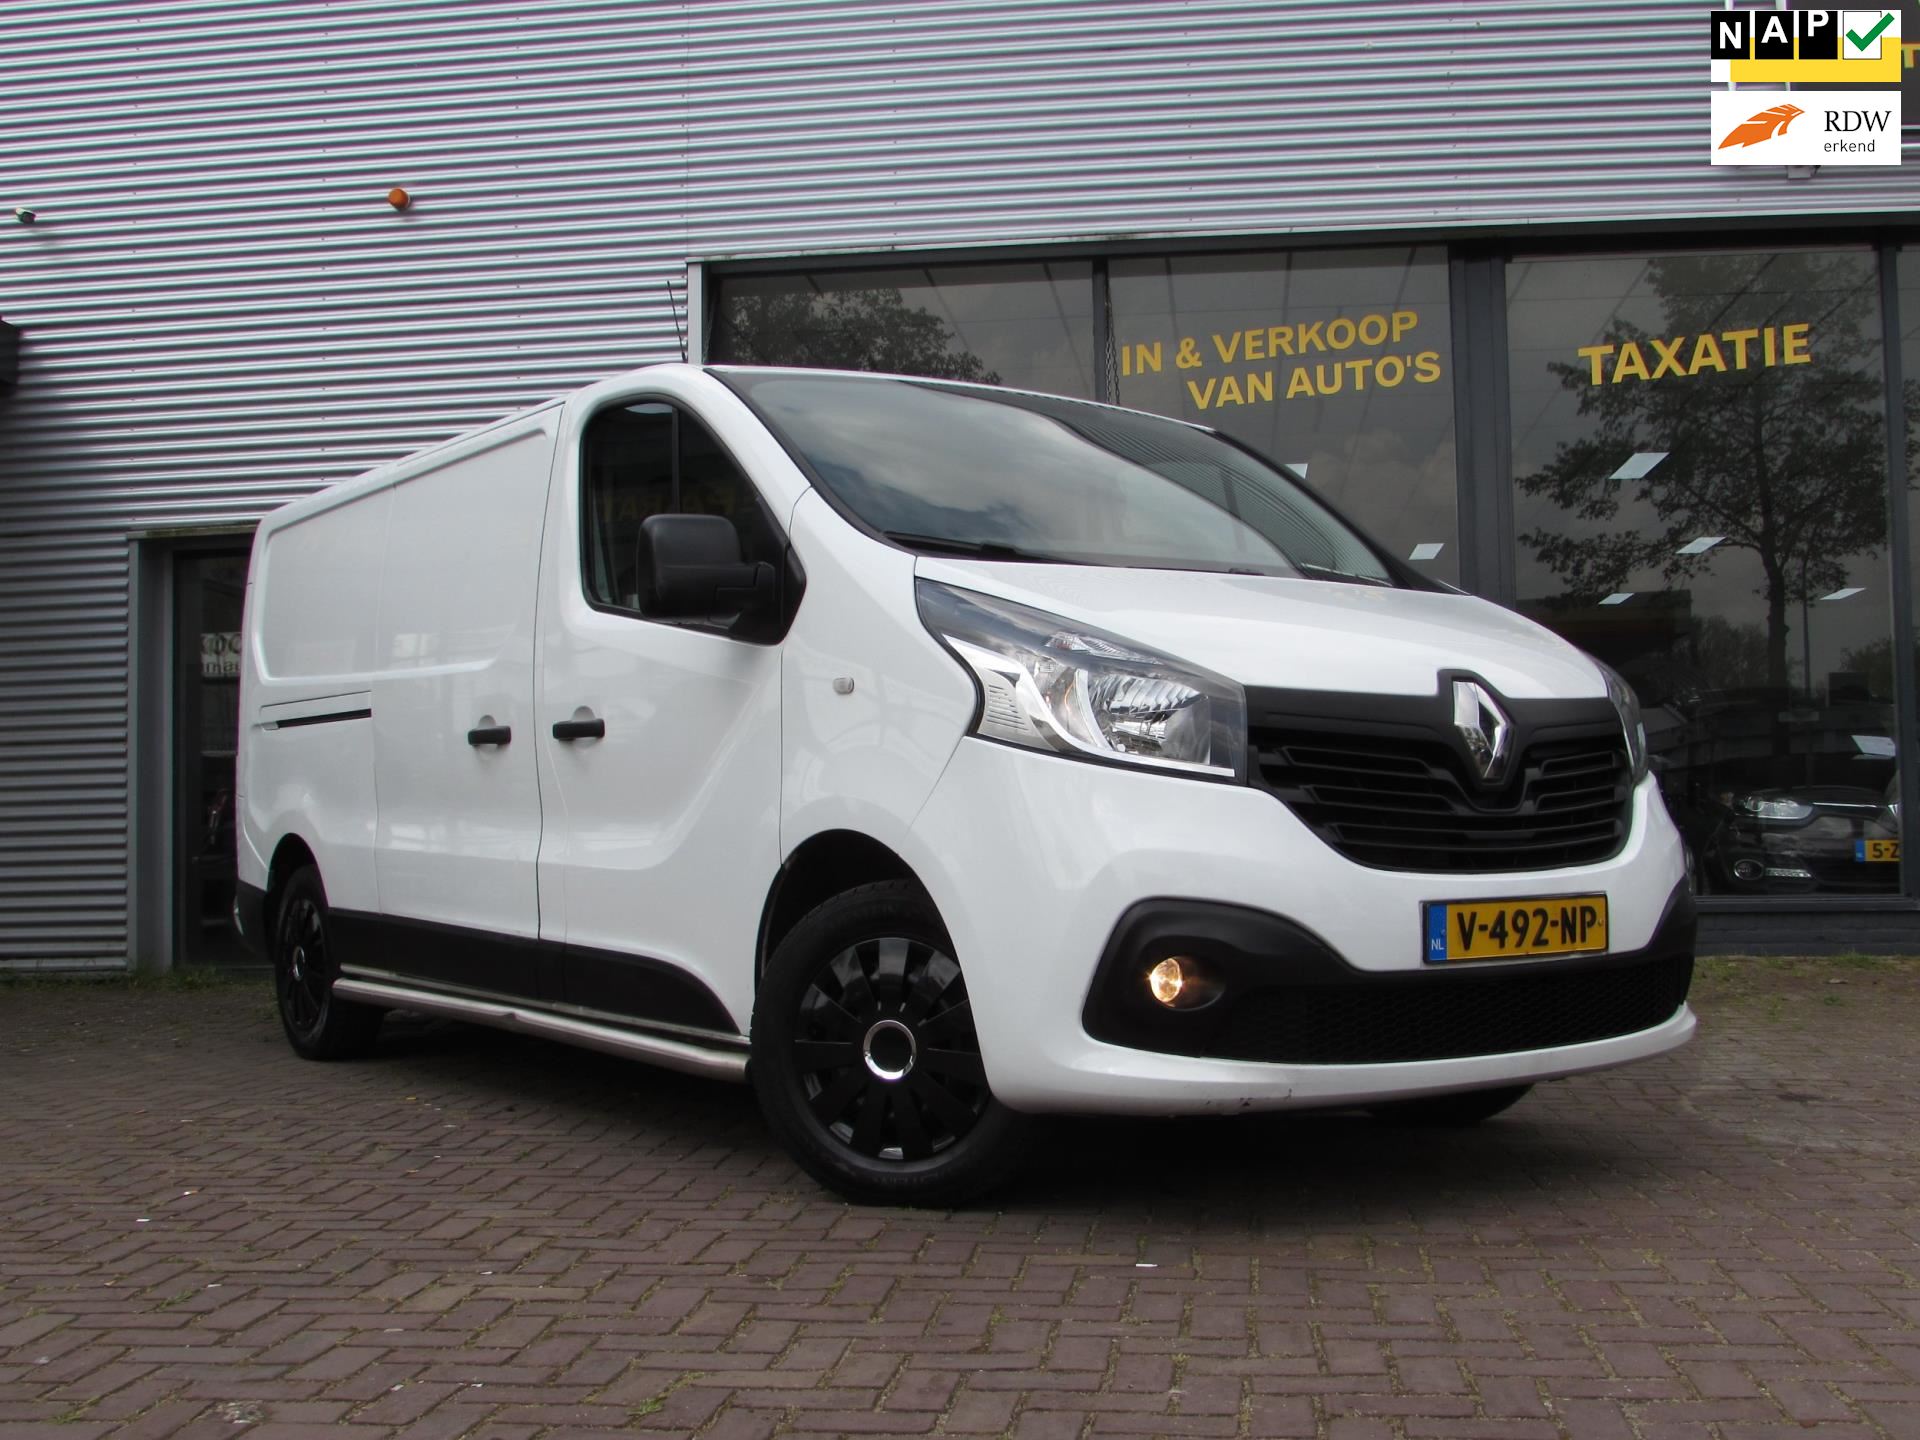 Renault Trafic occasion - D&M Cars